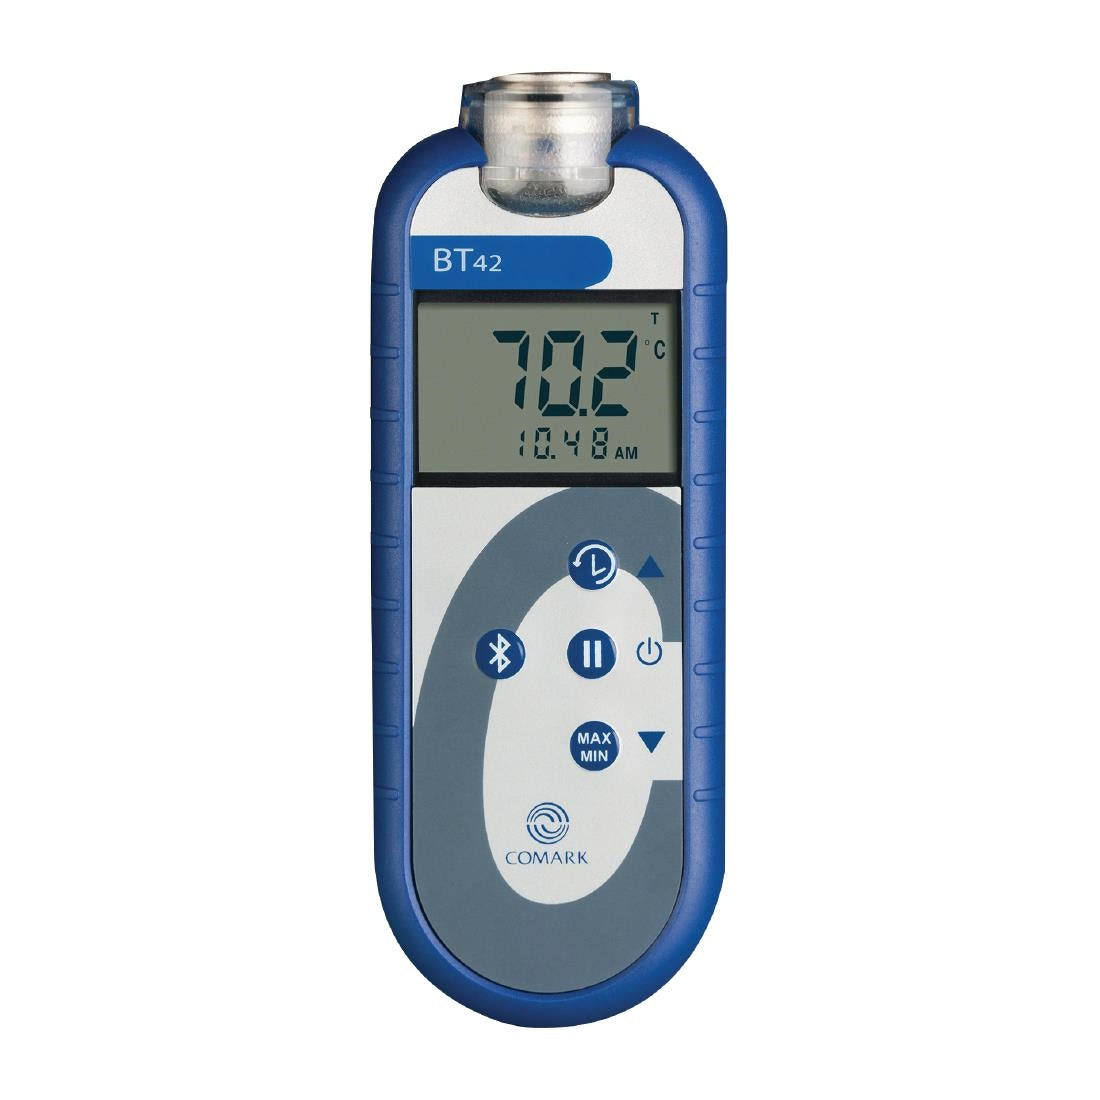 FW504 Comark Bluetooth High Performance Thermometer JD Catering Equipment Solutions Ltd